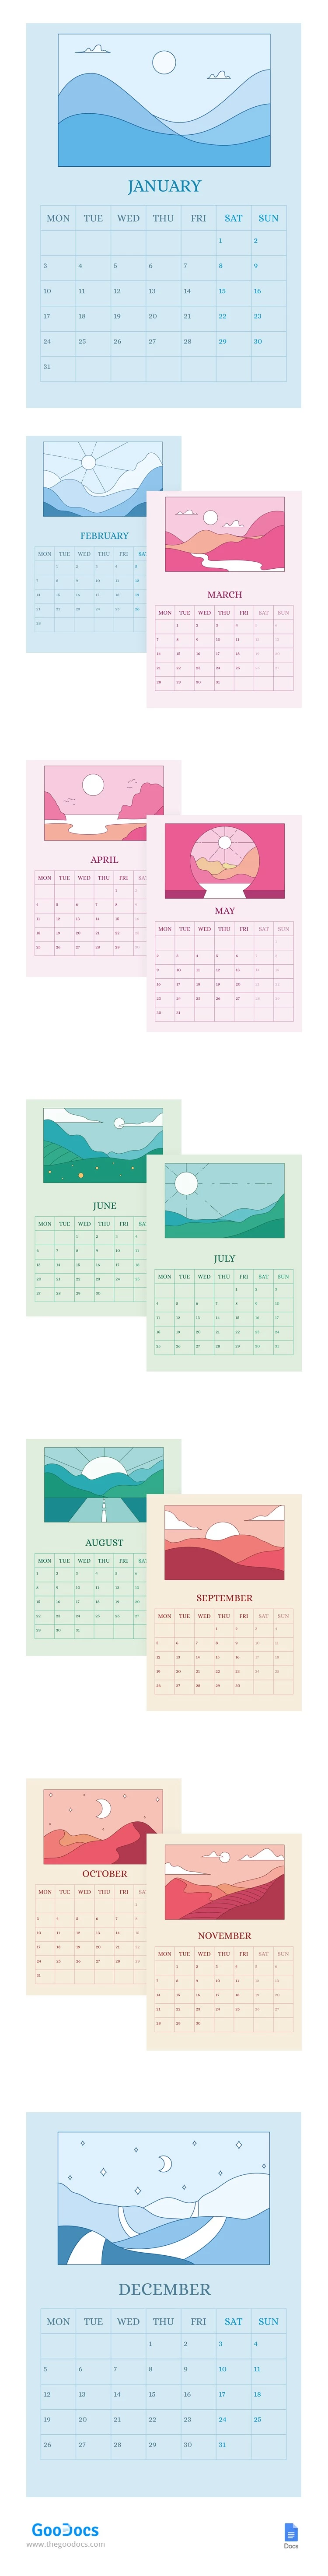 Calendrier paysage 2022 - free Google Docs Template - 10062218